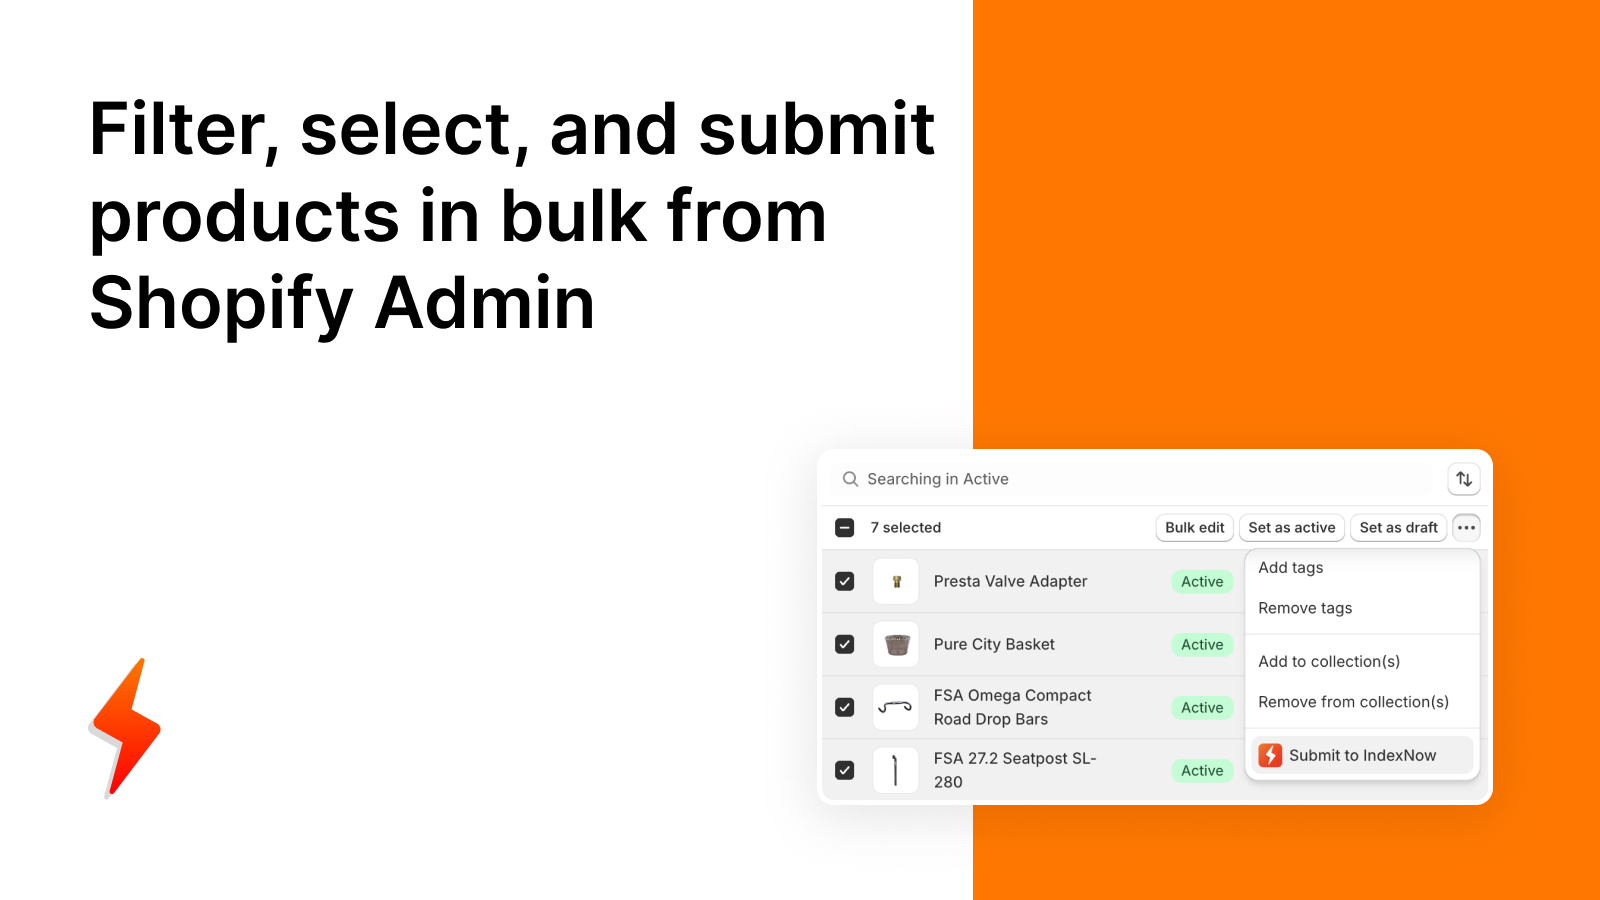 Filter, select, and submit products in bulk from Shopify Admin